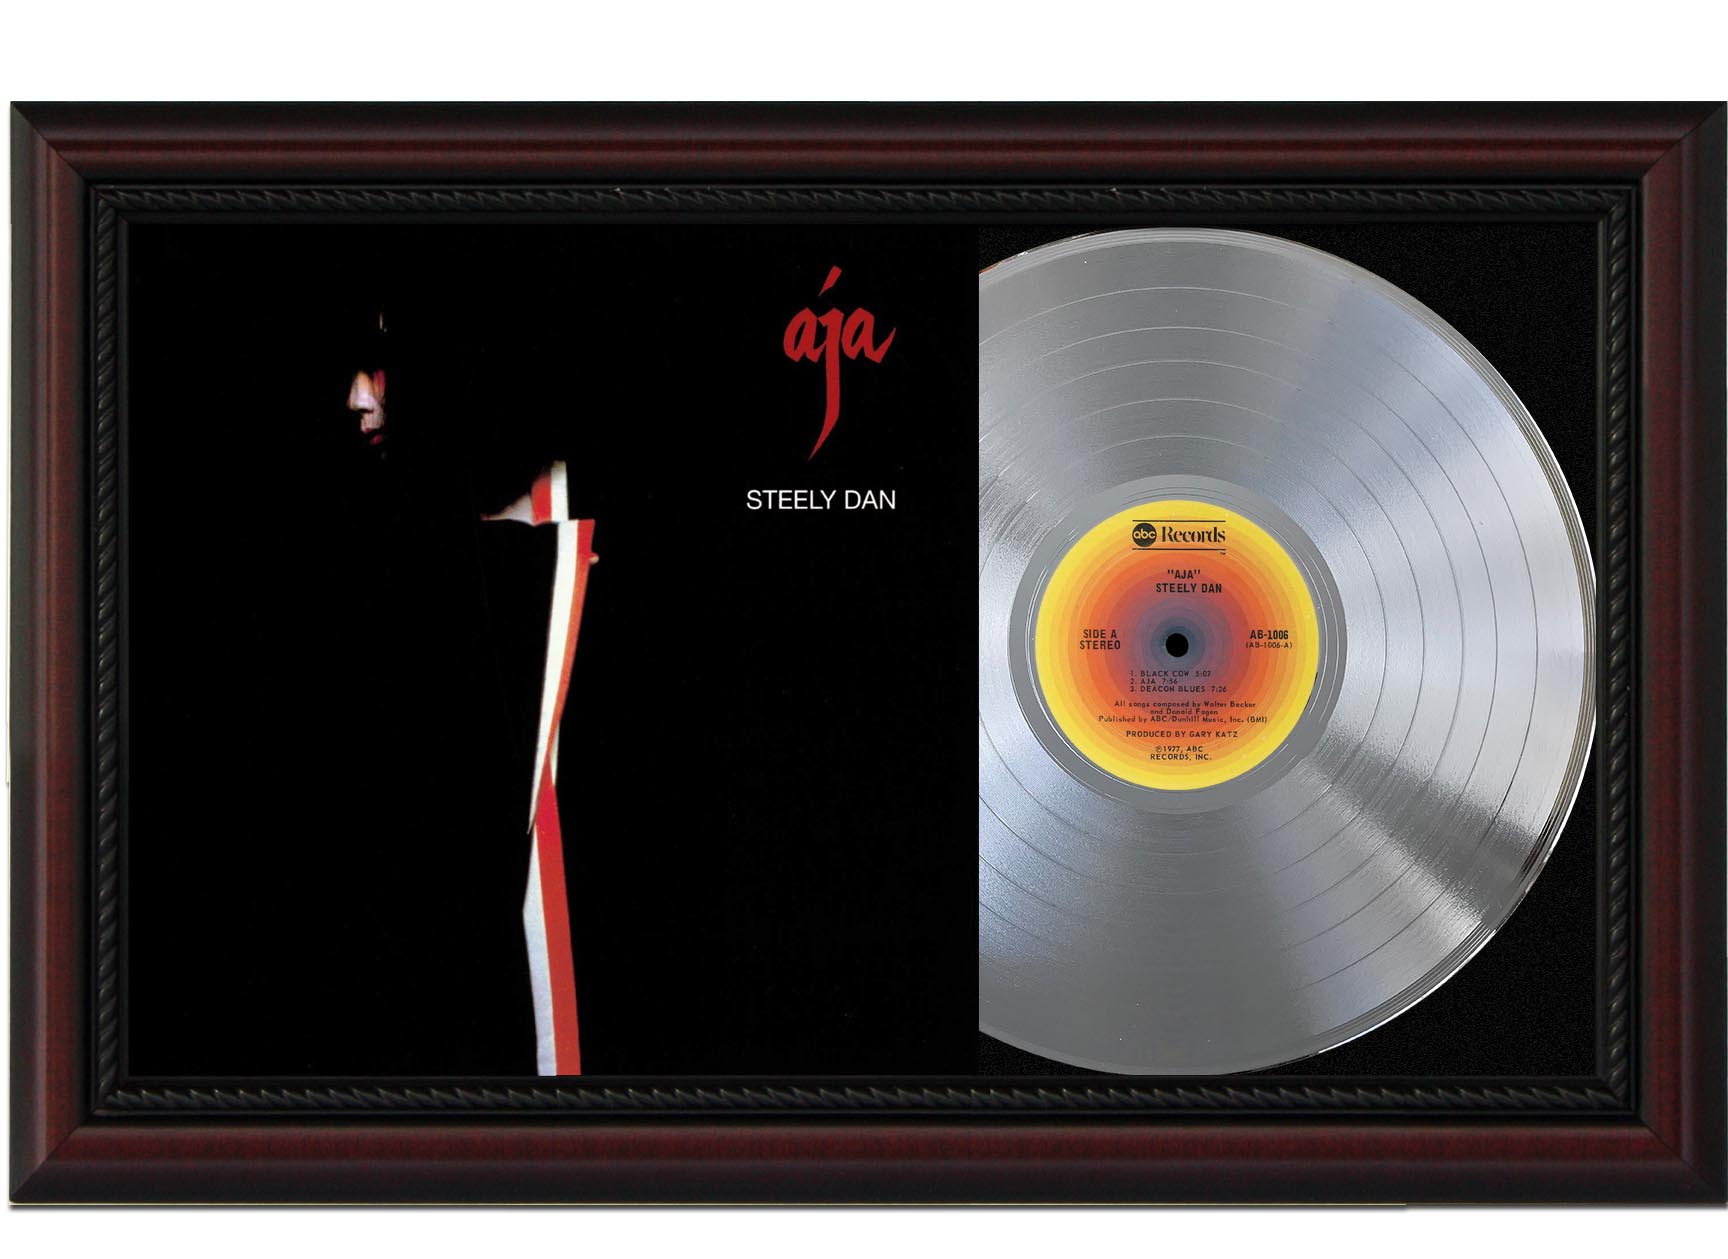 Forfølge ønskelig Kanon Steely Dan - Aja Platinum LP Record Sleeve Display M4 - Gold Record Outlet  Album and Disc Collectible Memorabilia